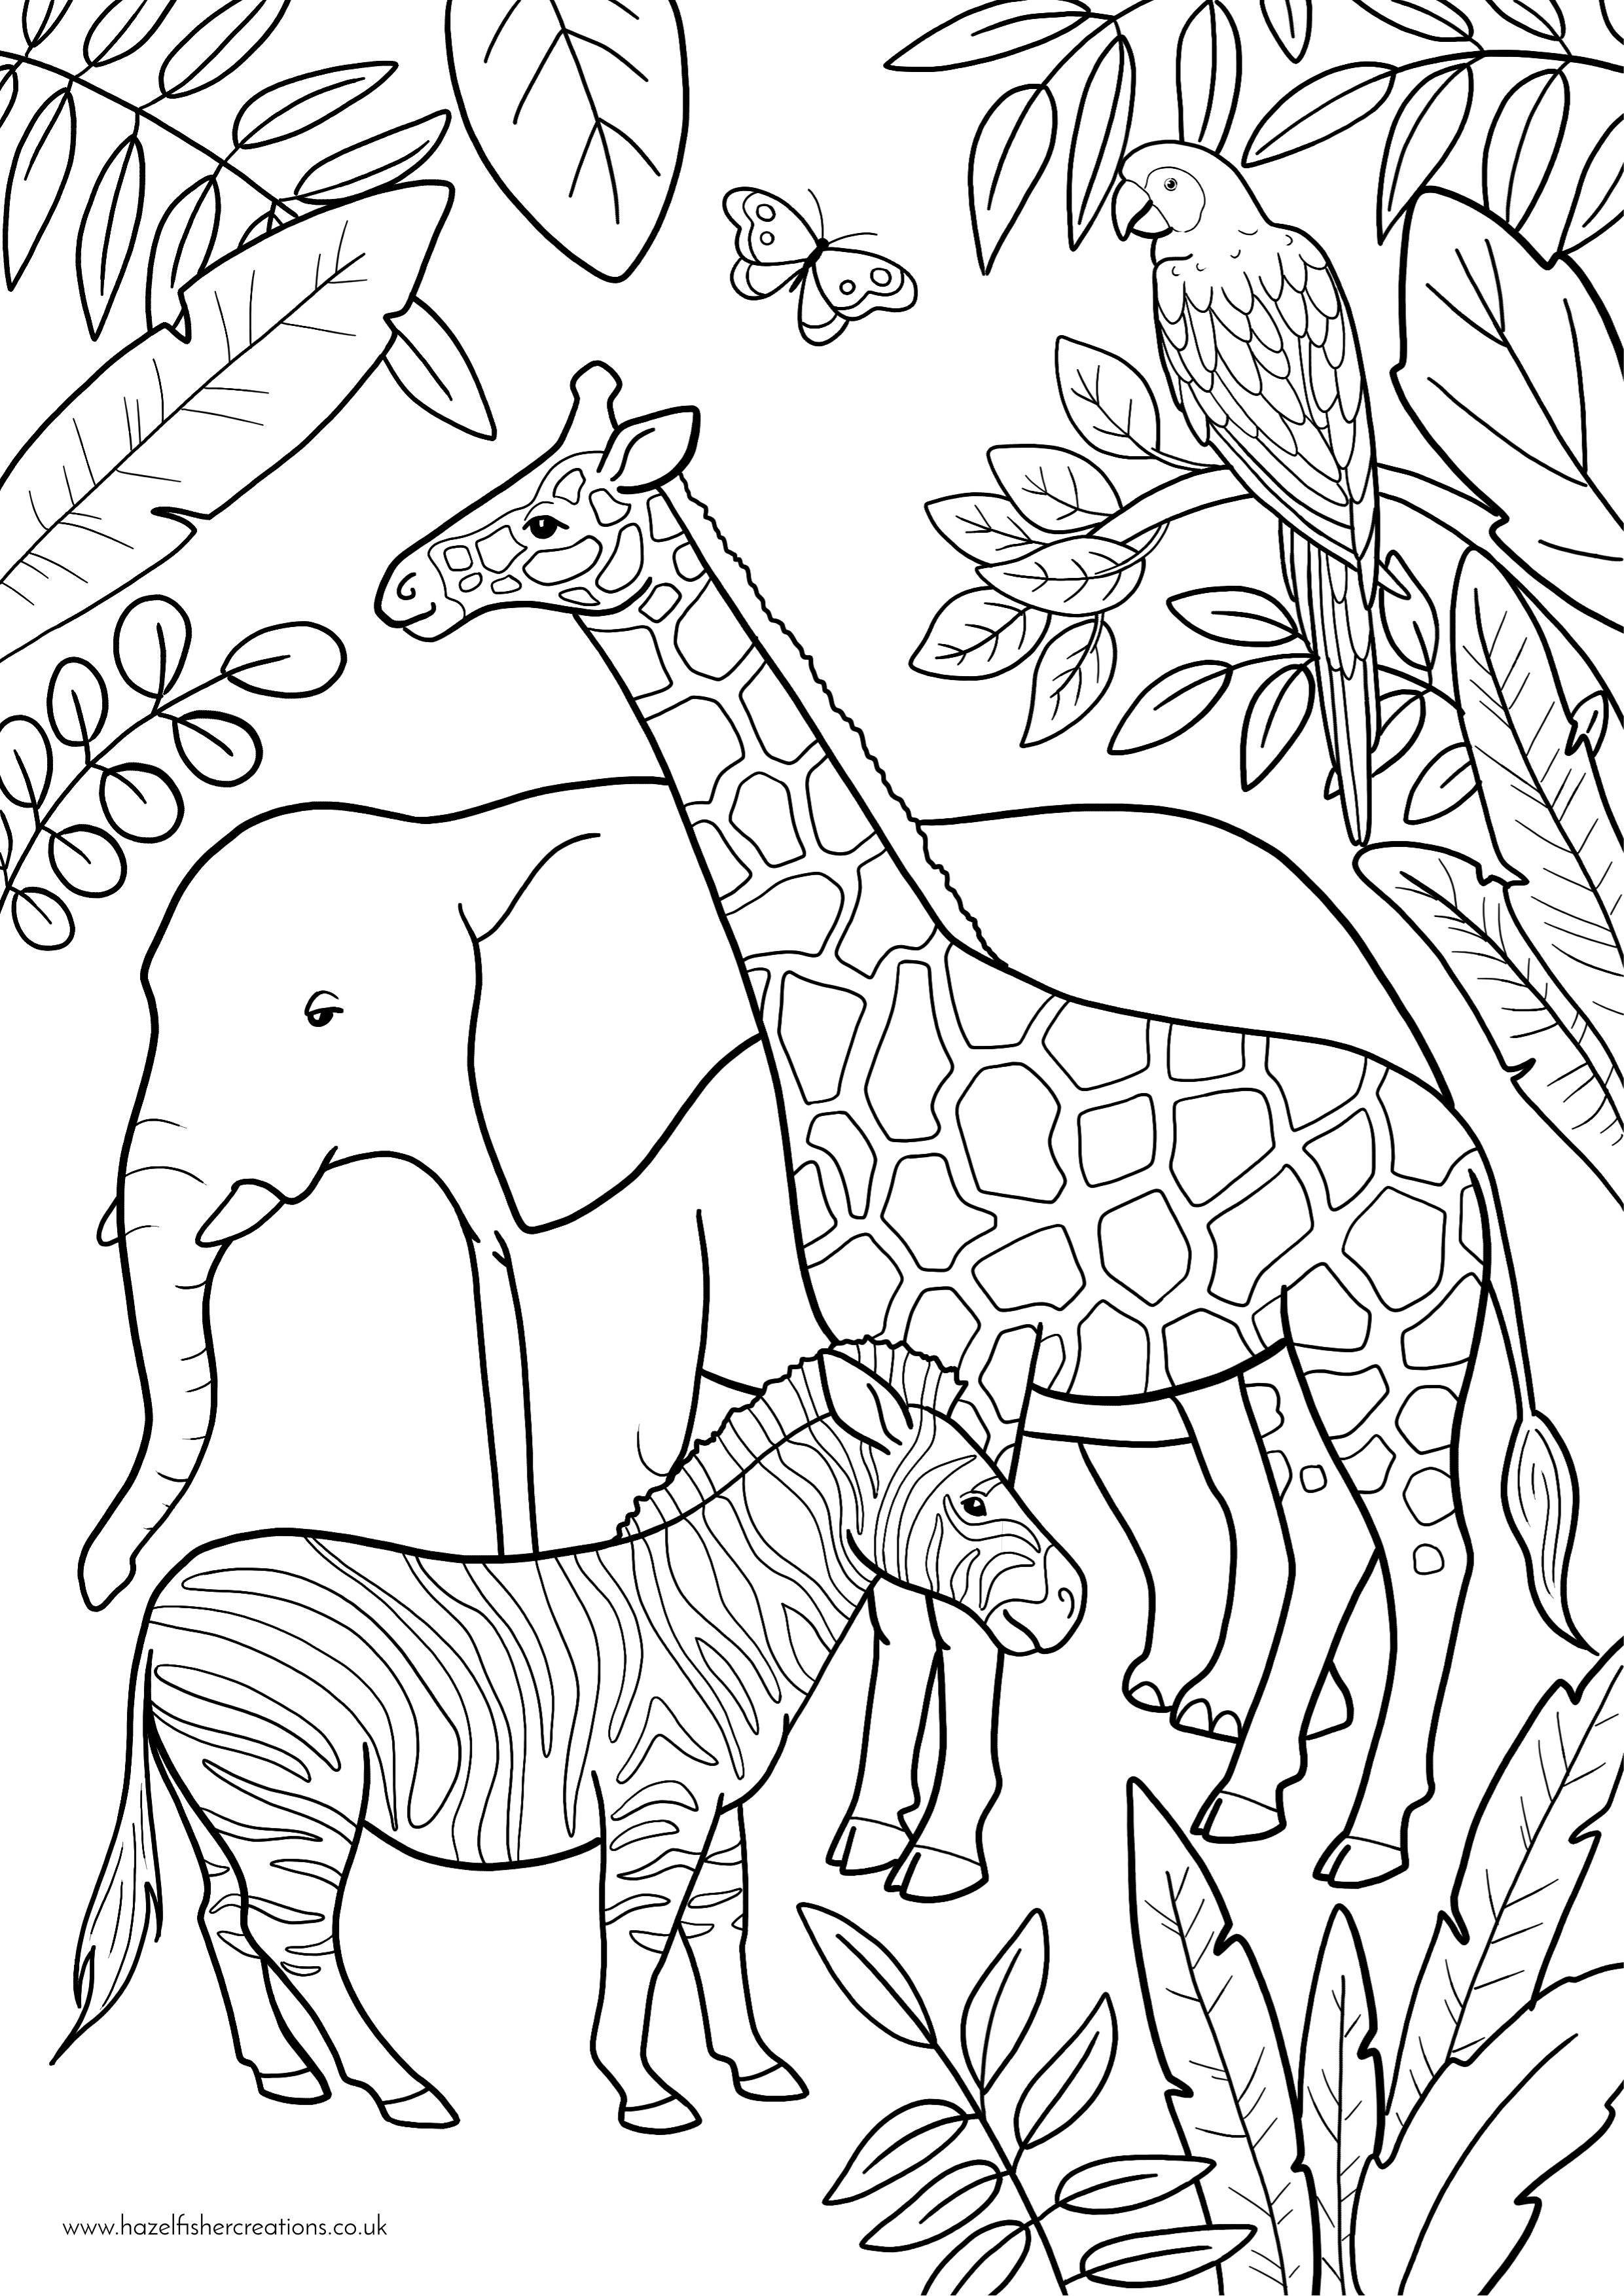 Zoo Animals Colouring In Activity Sheet   image